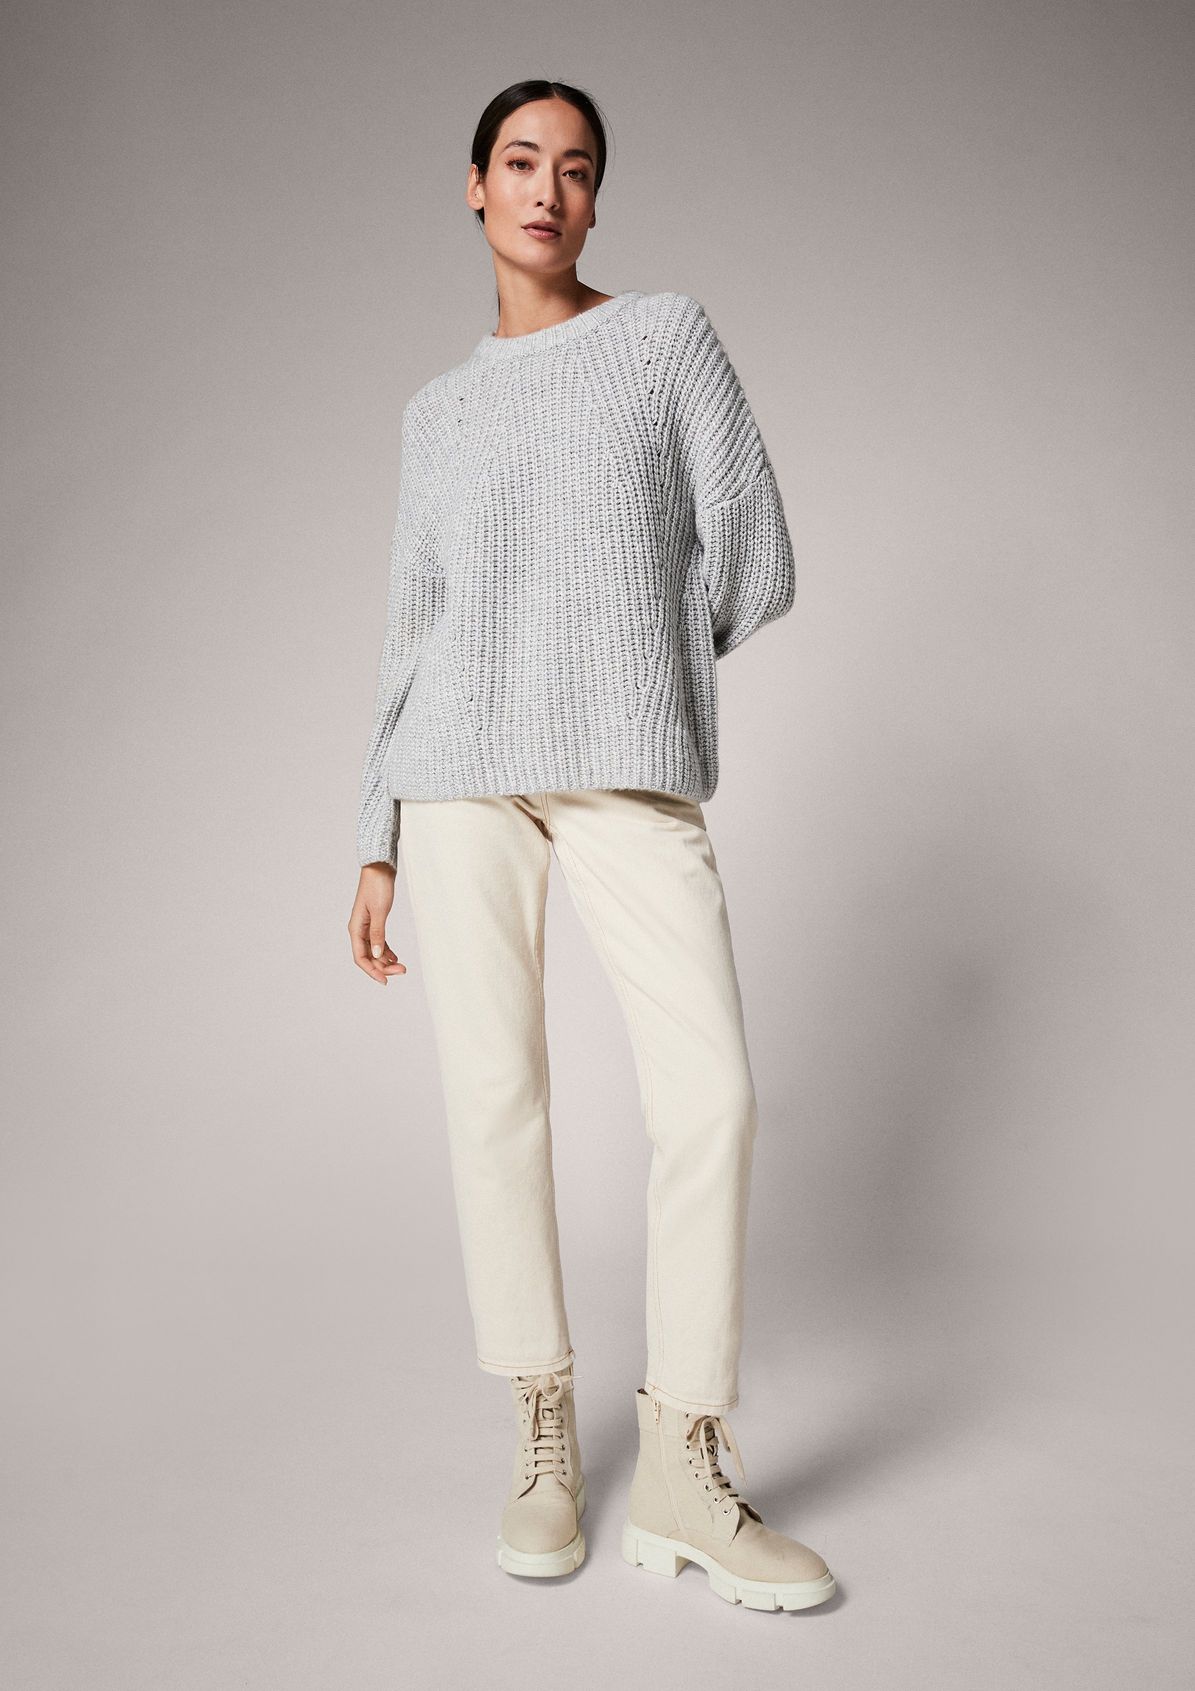 Soft jumper in a textured knit from comma